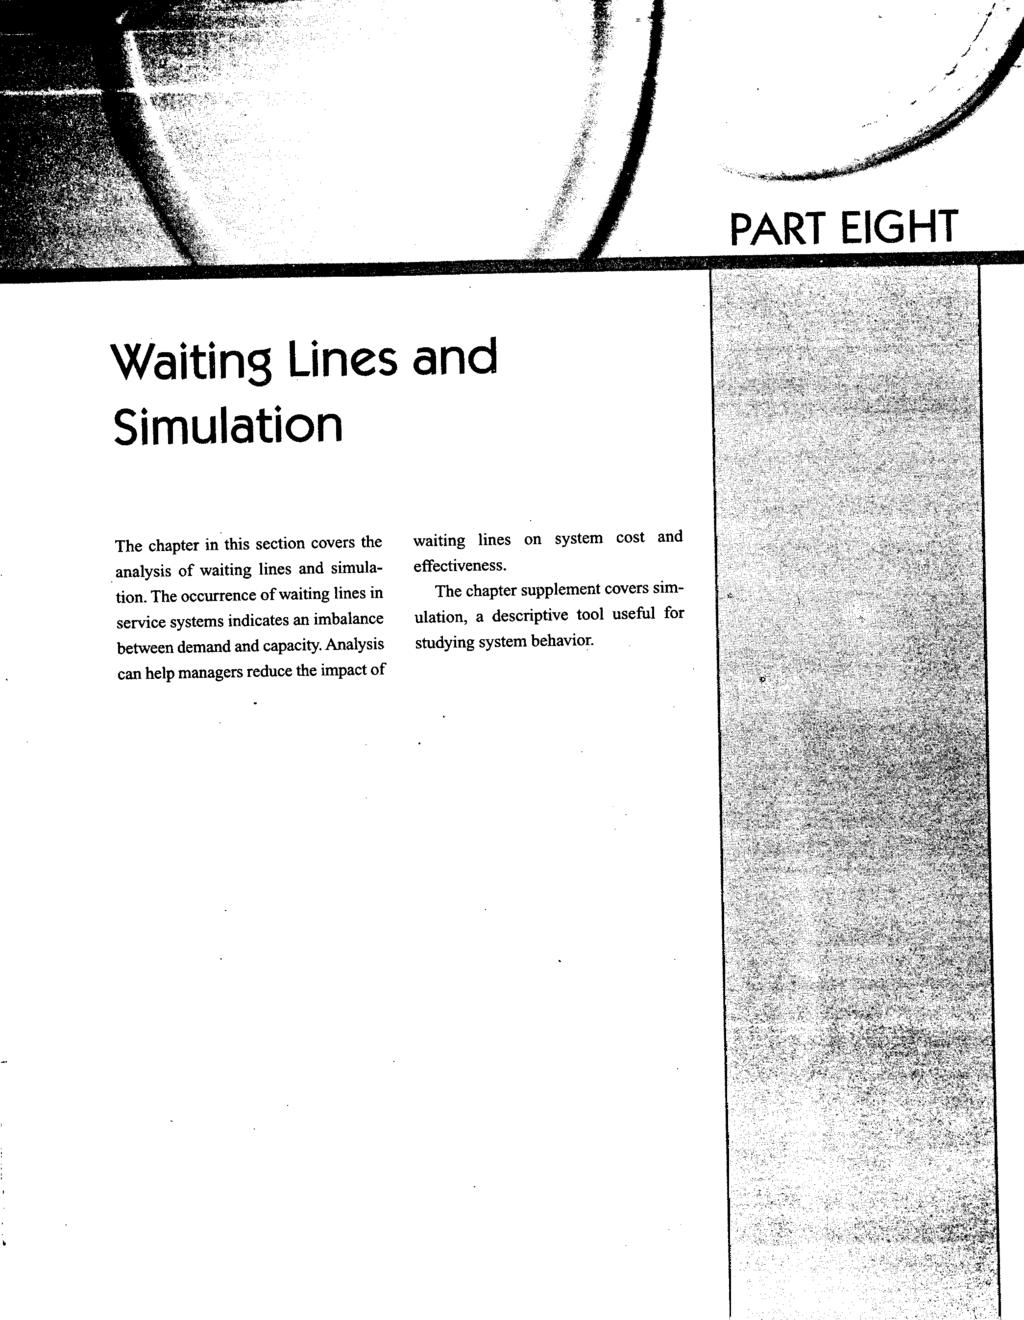 : I - PART EIGHT Waiting Lines and Simulation The chapter in this section covers the waiting lines on system cost and analysis of waiting lines and simula- effectiveness. tion.